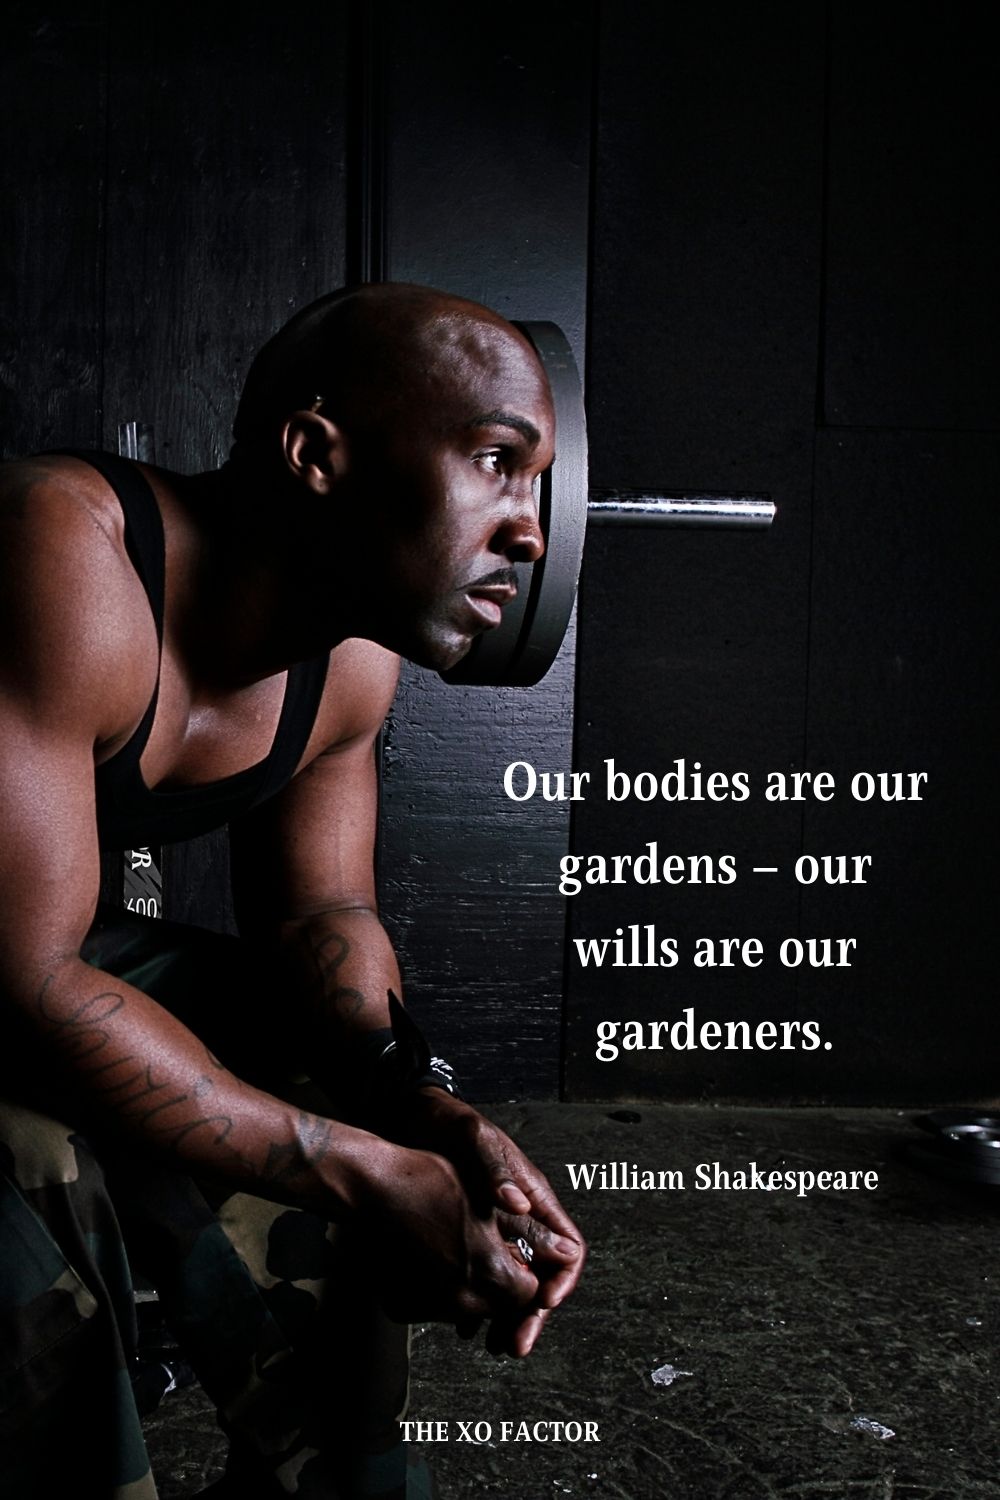 Our bodies are our gardens – our wills are our gardeners. William Shakespeare